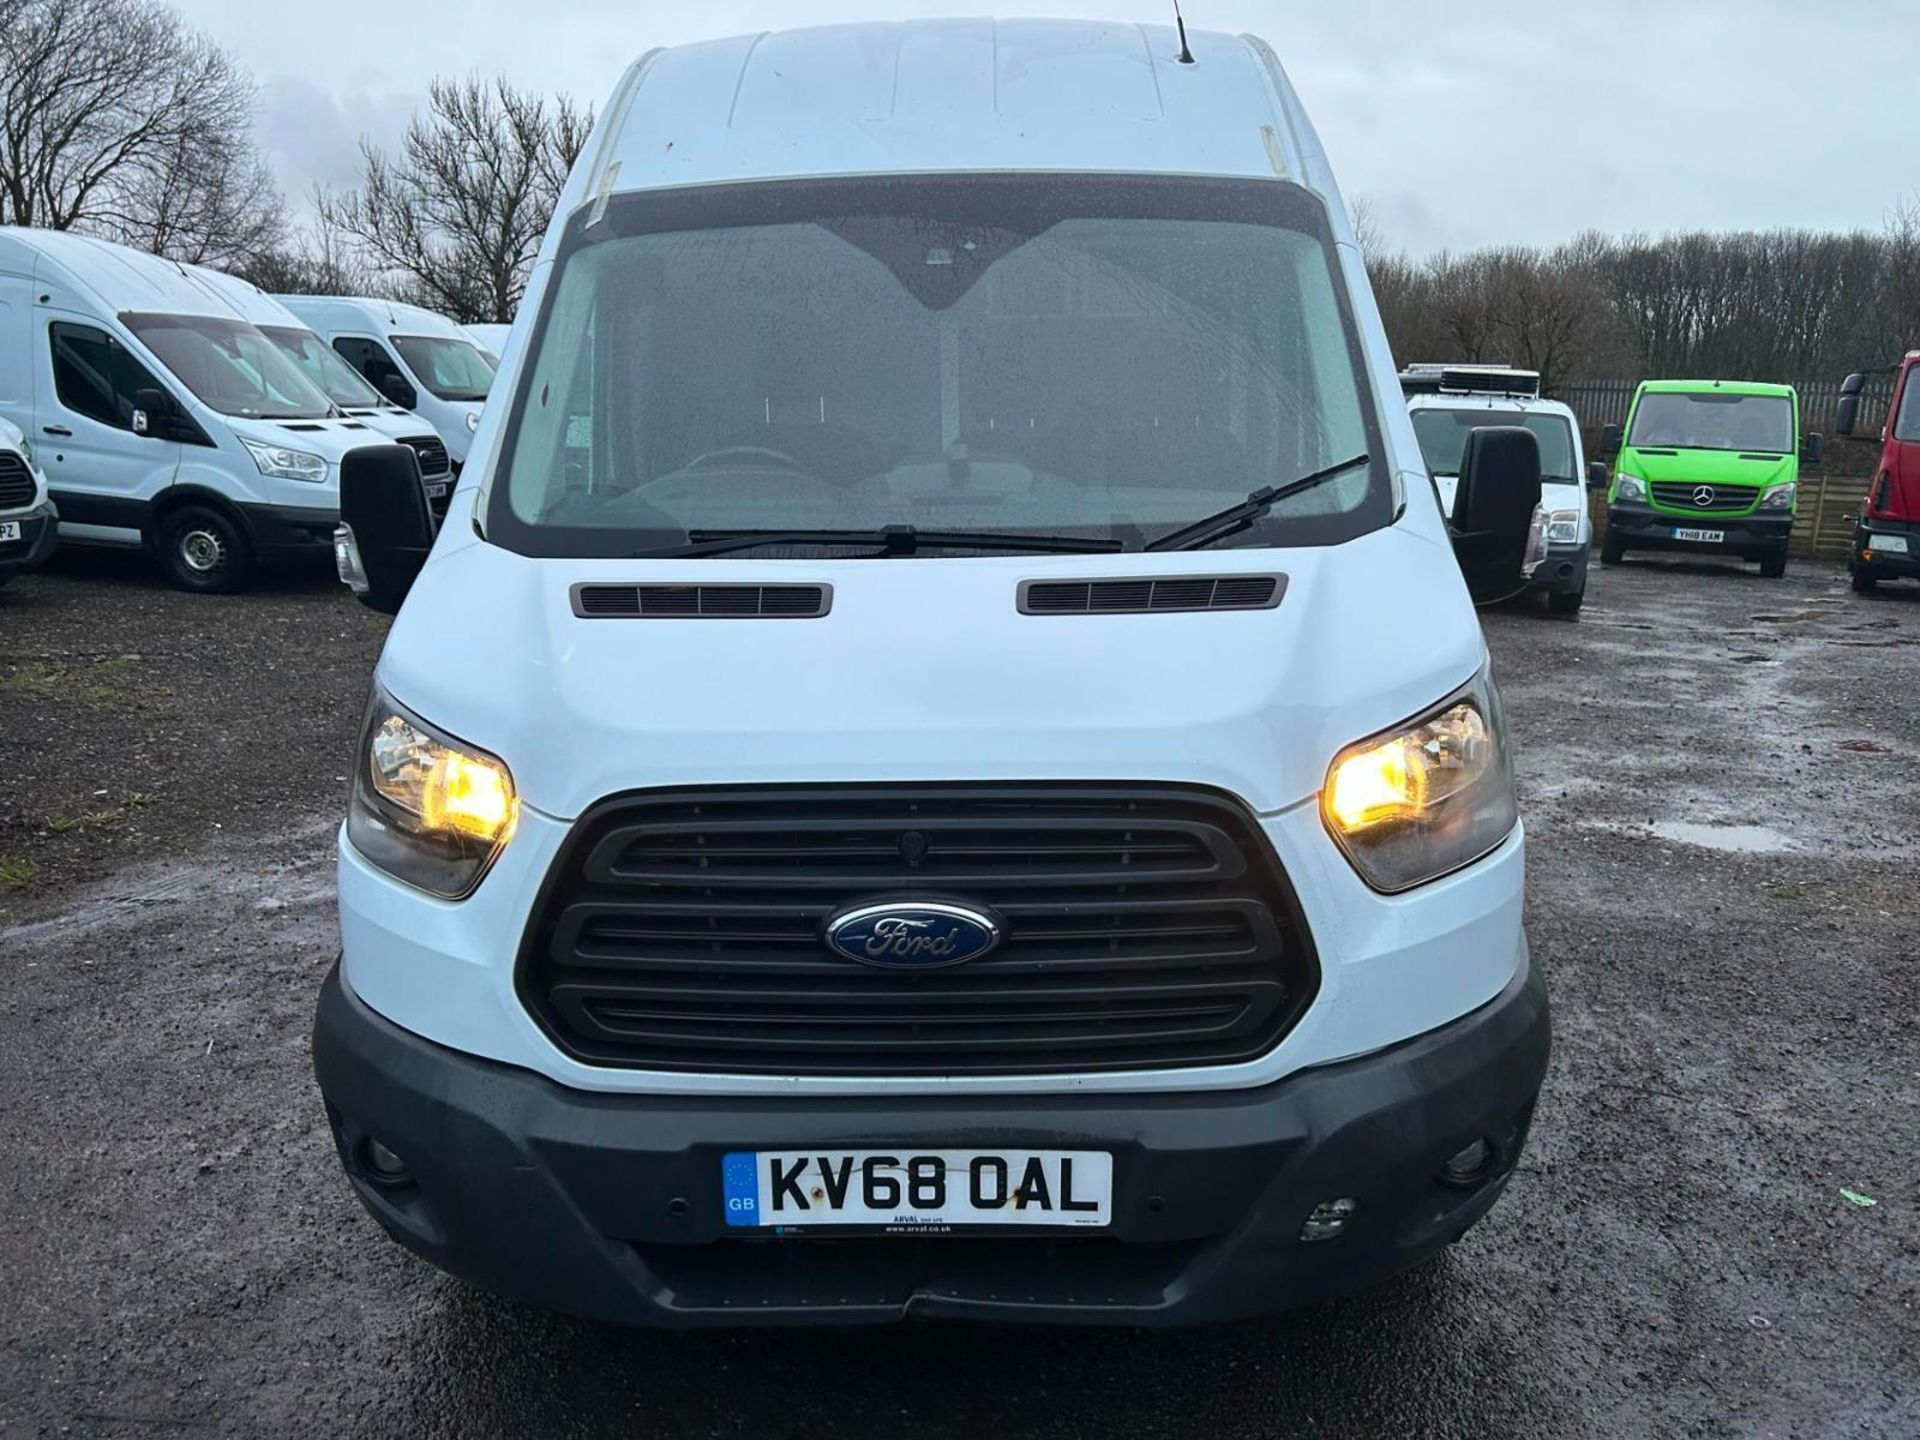 >>>SPECIAL CLEARANCE<<< 2018 FORD TRANSIT 2.0 TDCI 130PS L3 H3 PANEL VAN - Image 2 of 13